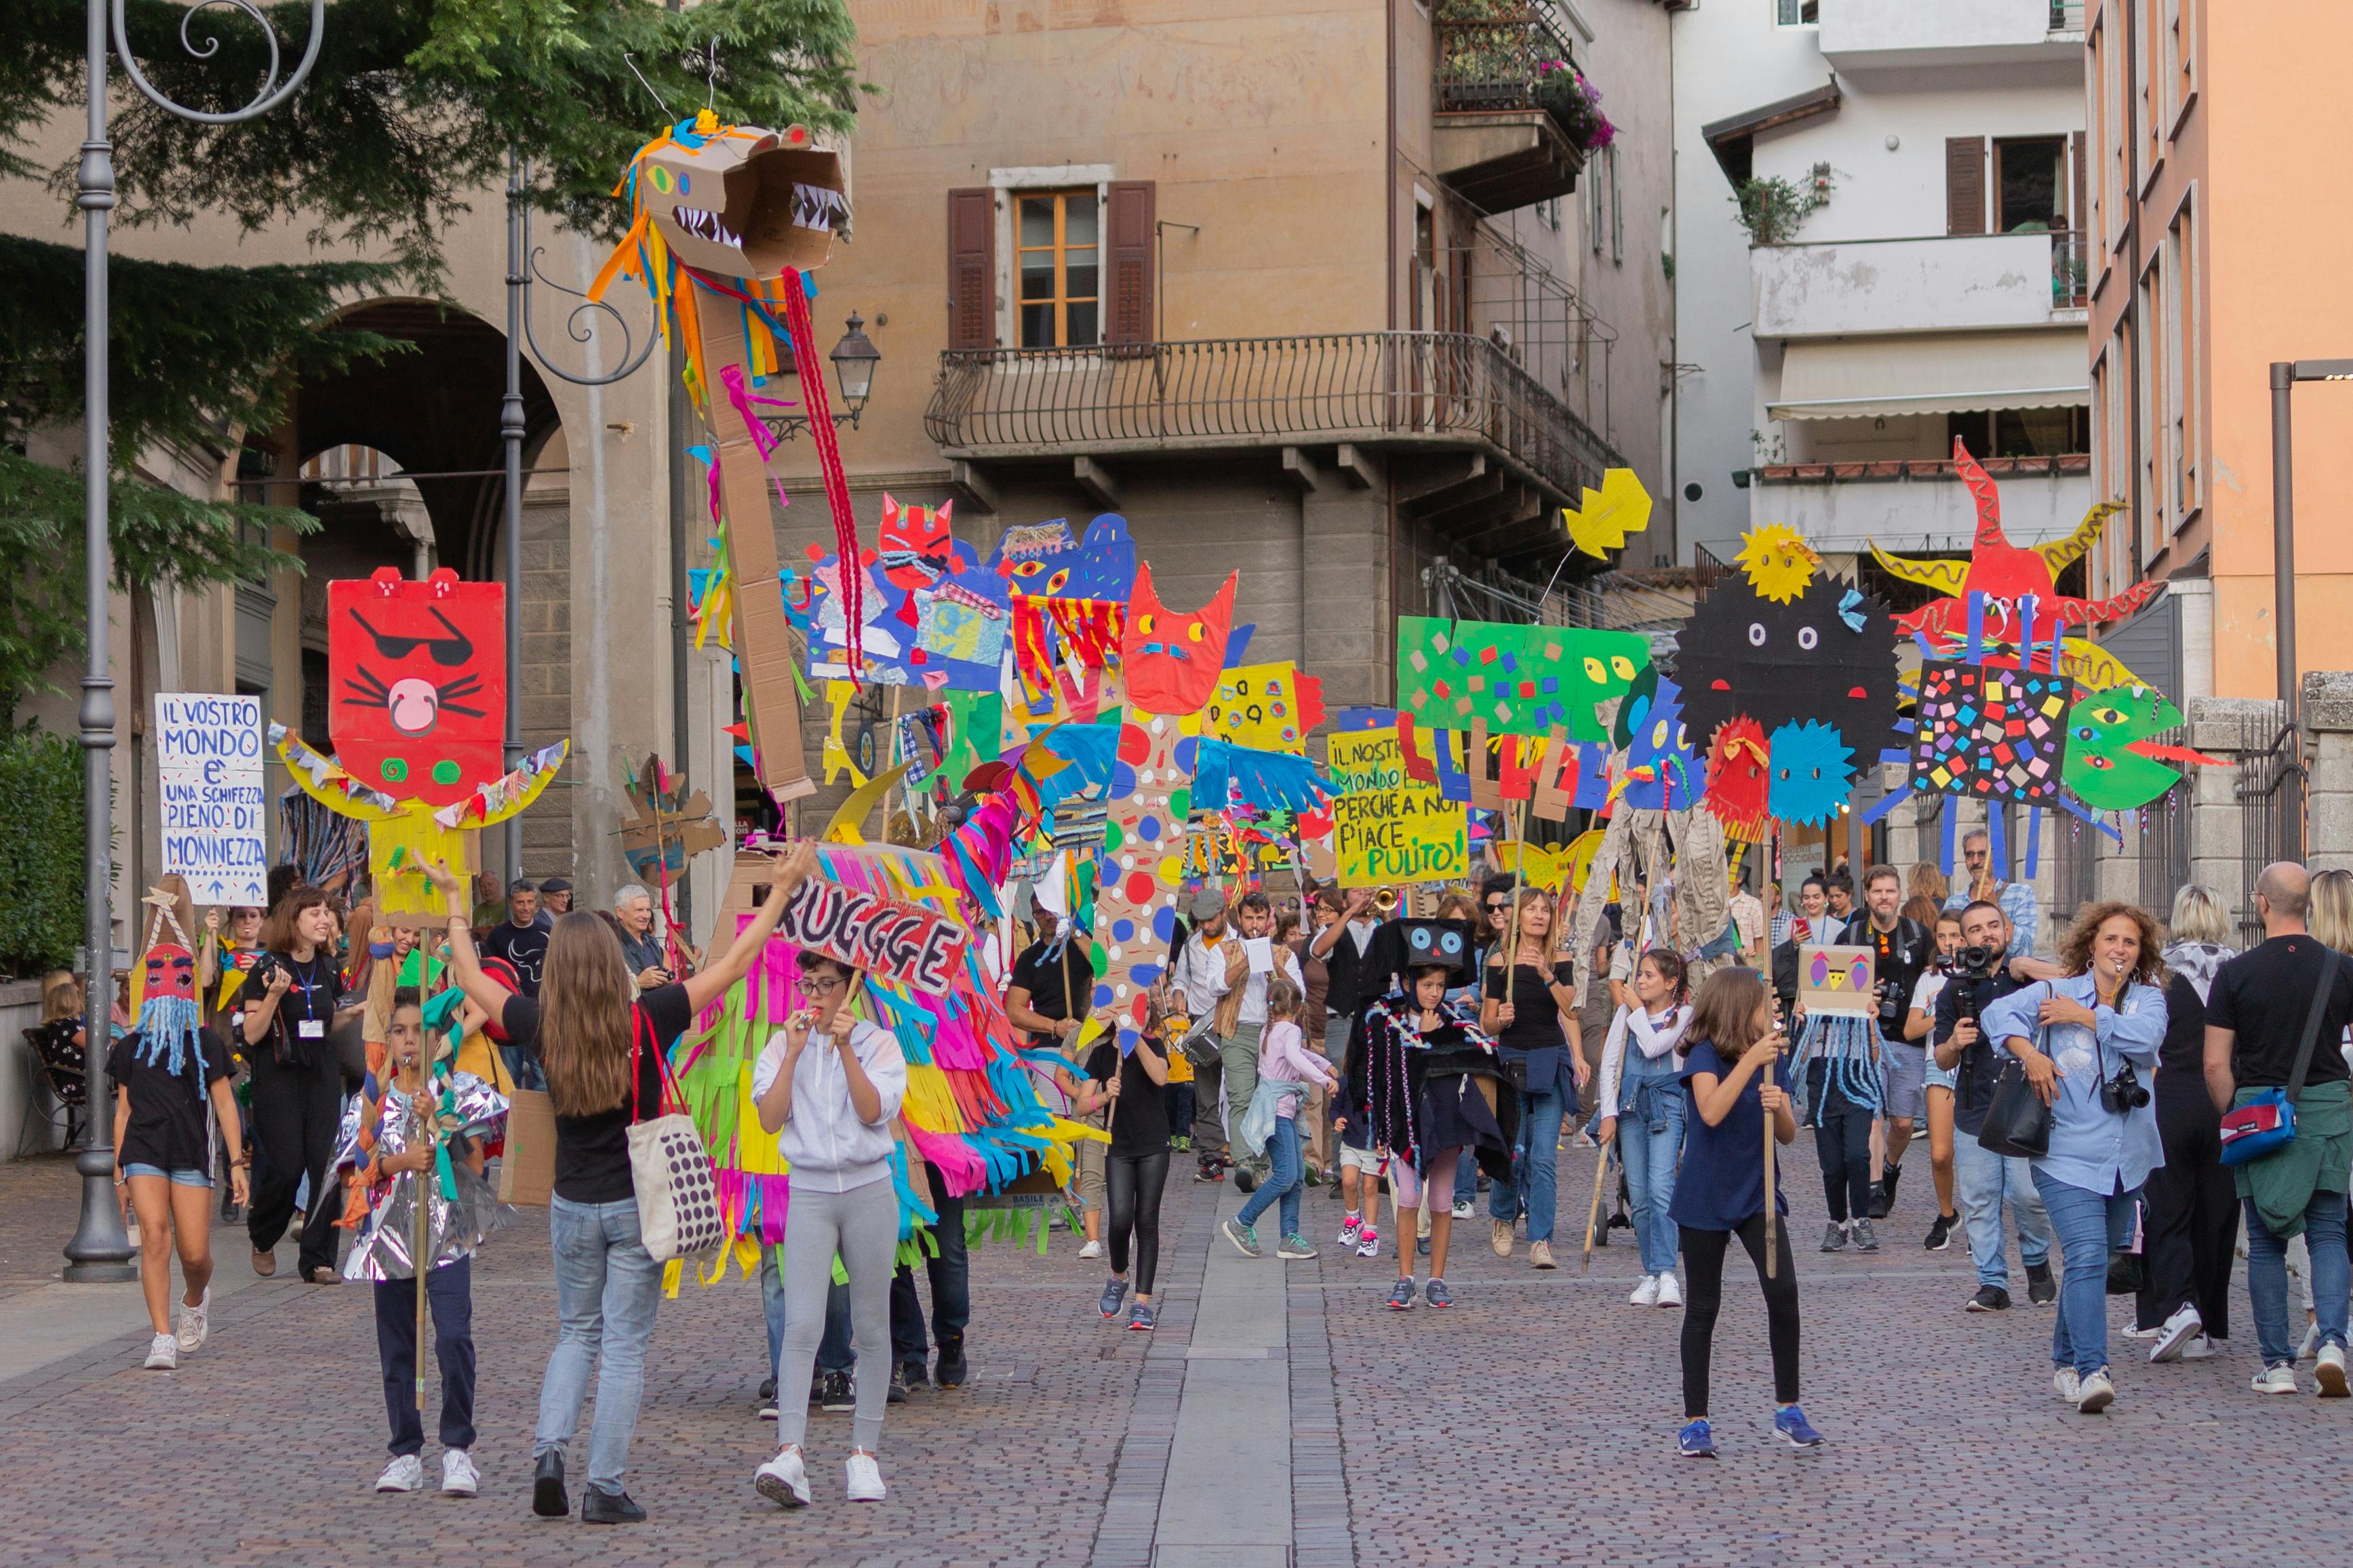 A parade of young people in the streets of Rovereto. They carry colourful signs made by the artist and march for environmental awareness.